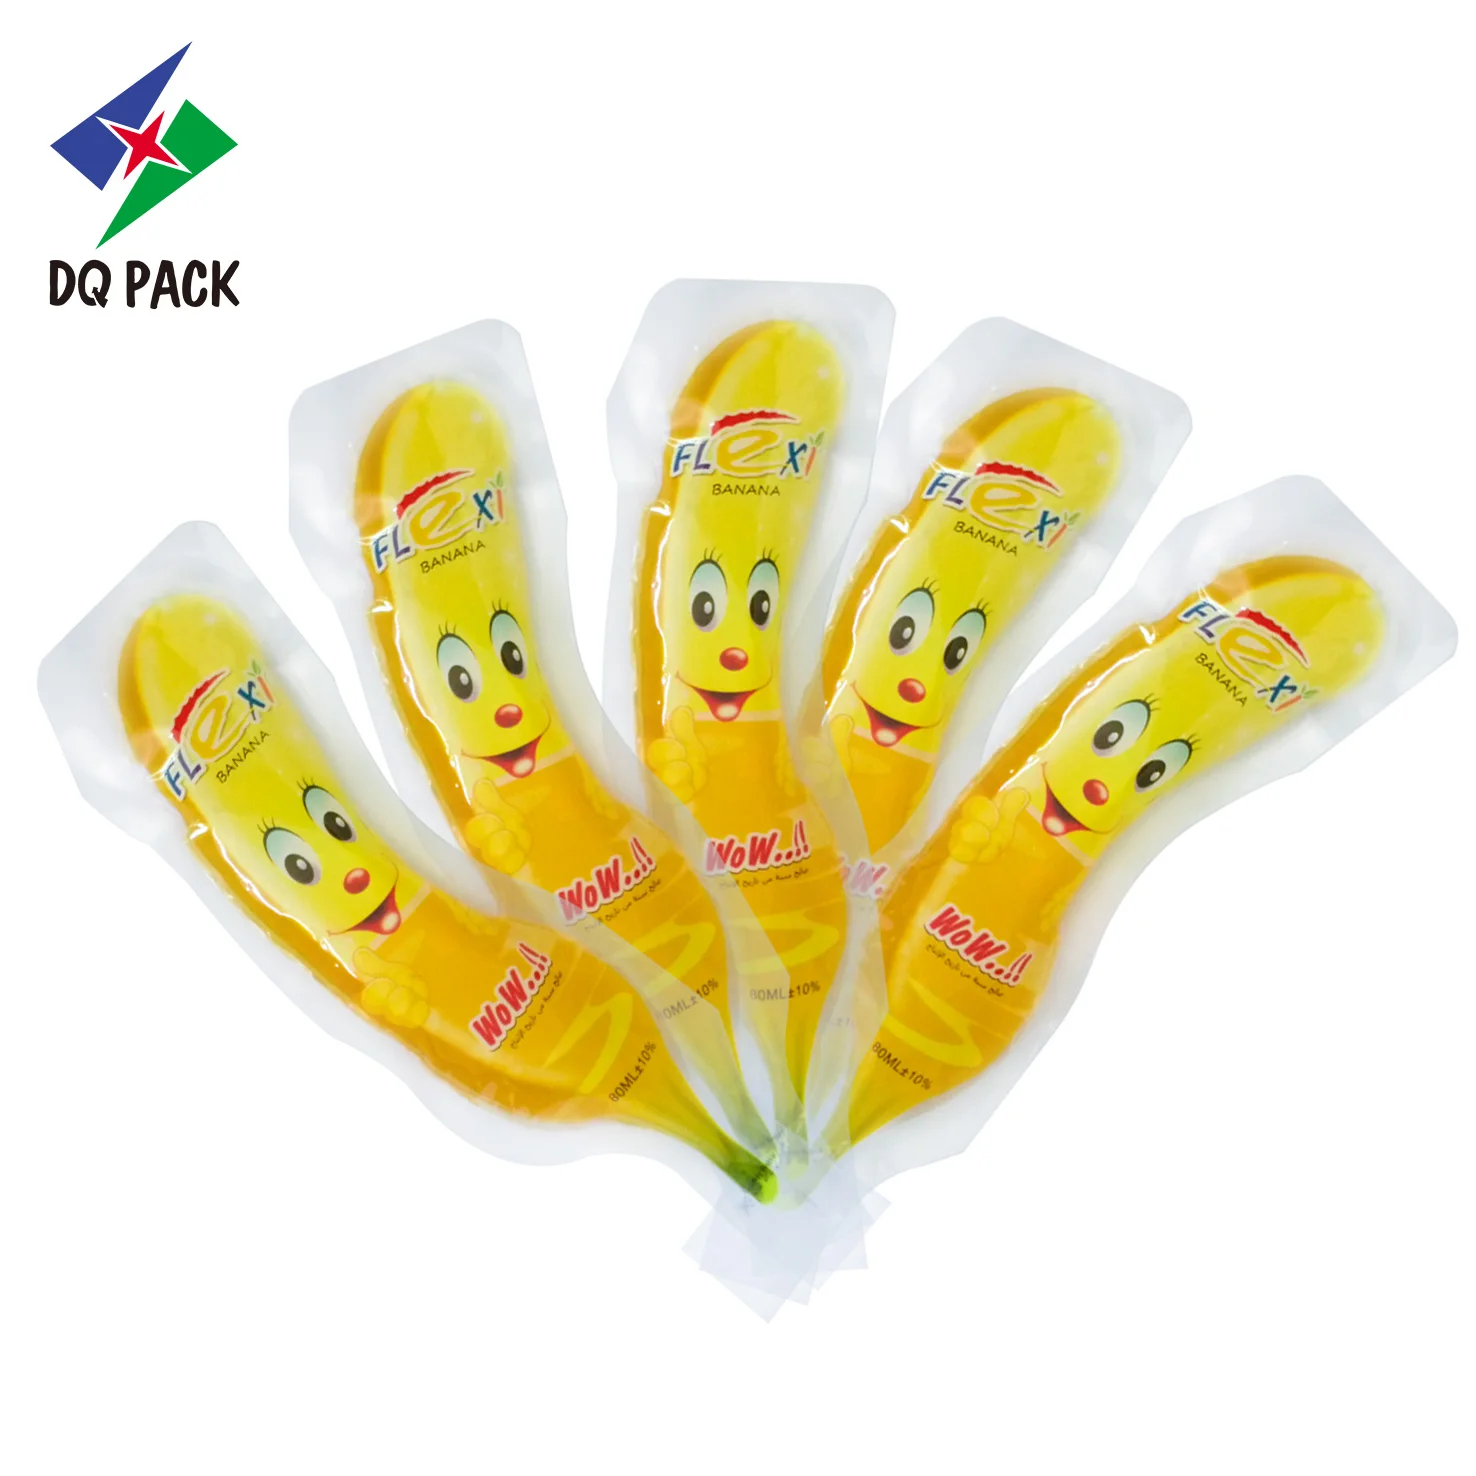 DQ PACK China Laminated injection pouch for drink pack L0083